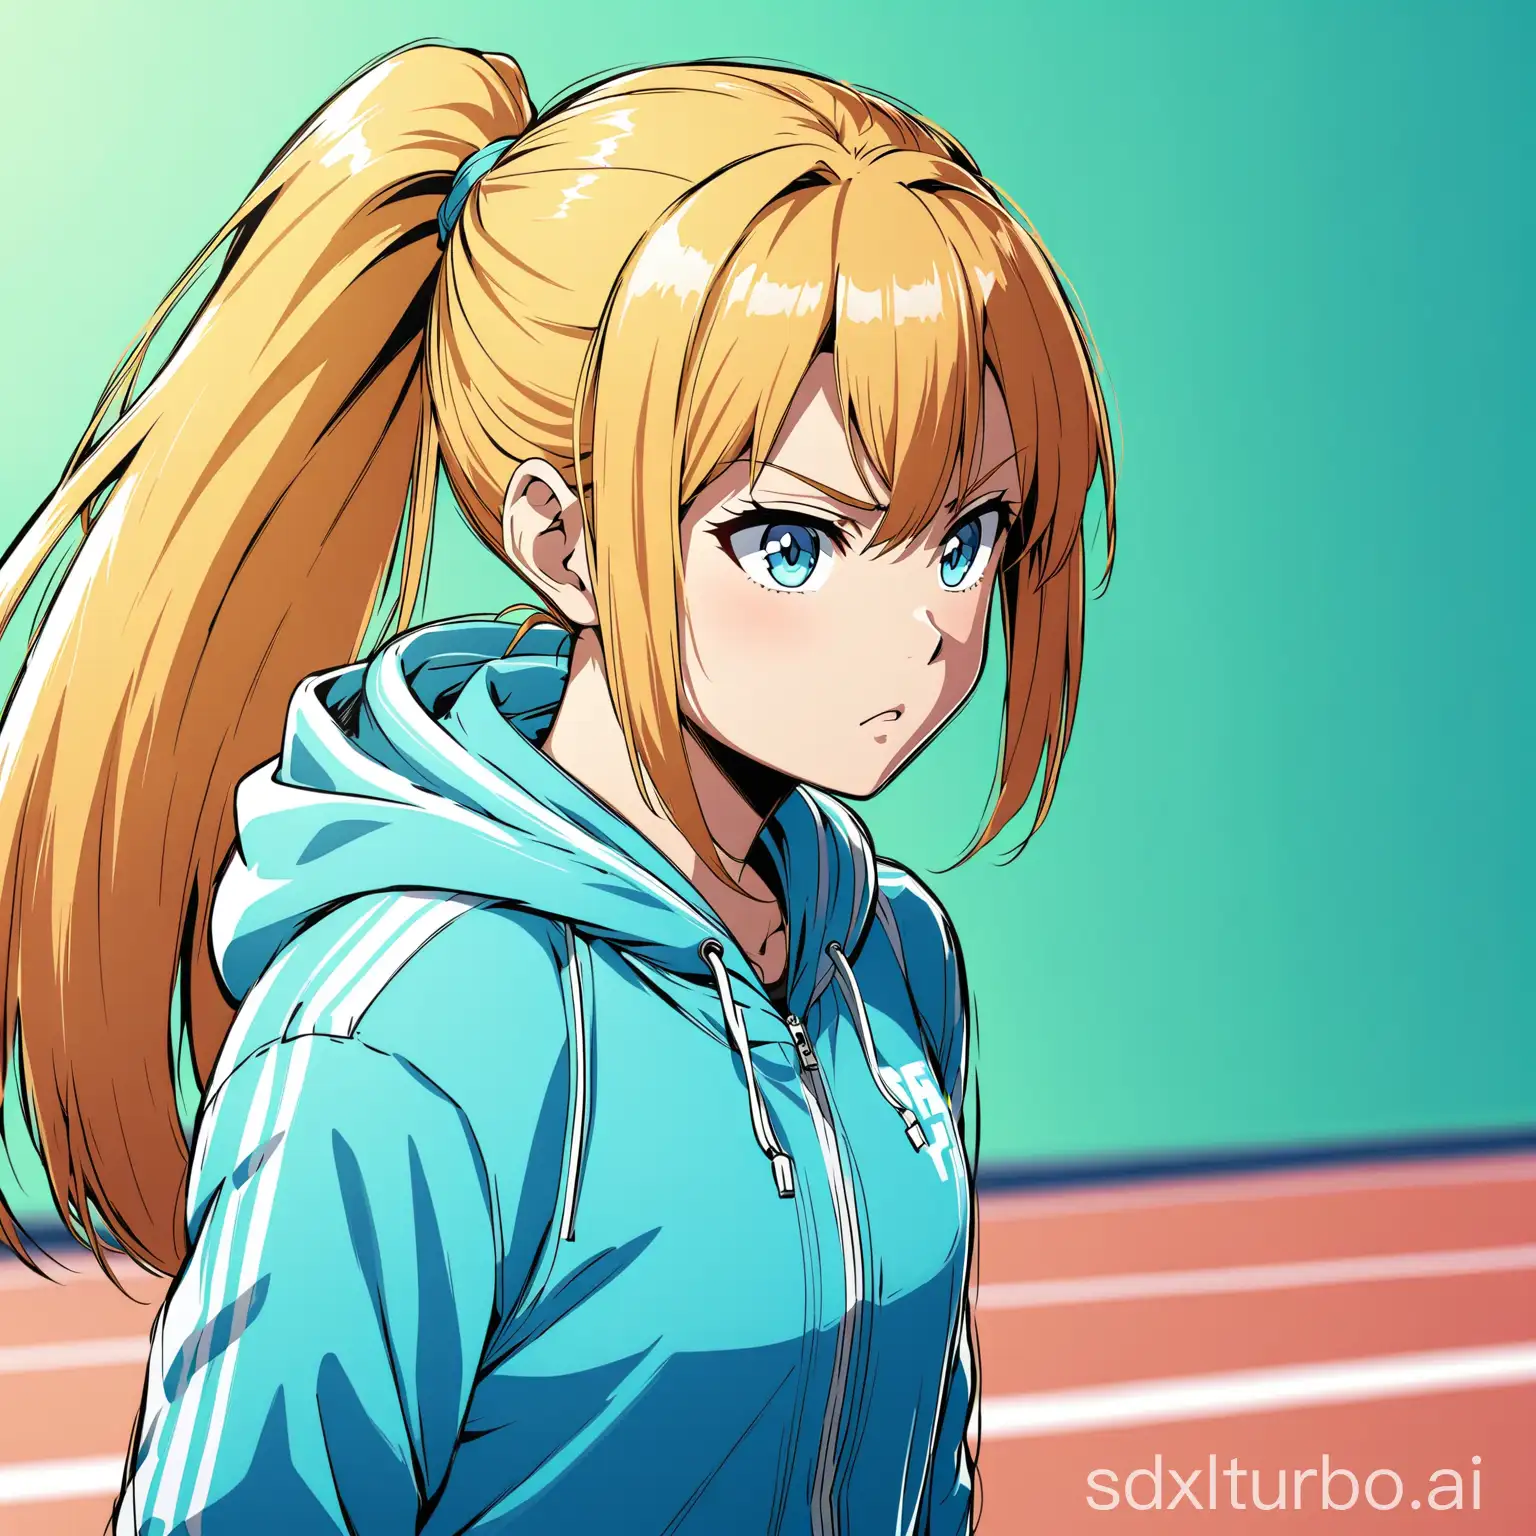 make images of a scandinavian thin low stature blonde teen girl, with frizzy long hair, with bangs and pony tail, blue eyes, with grey-violet university jacket, doing gym exercises, serious face, Tatsuji Fujimoto's anime style